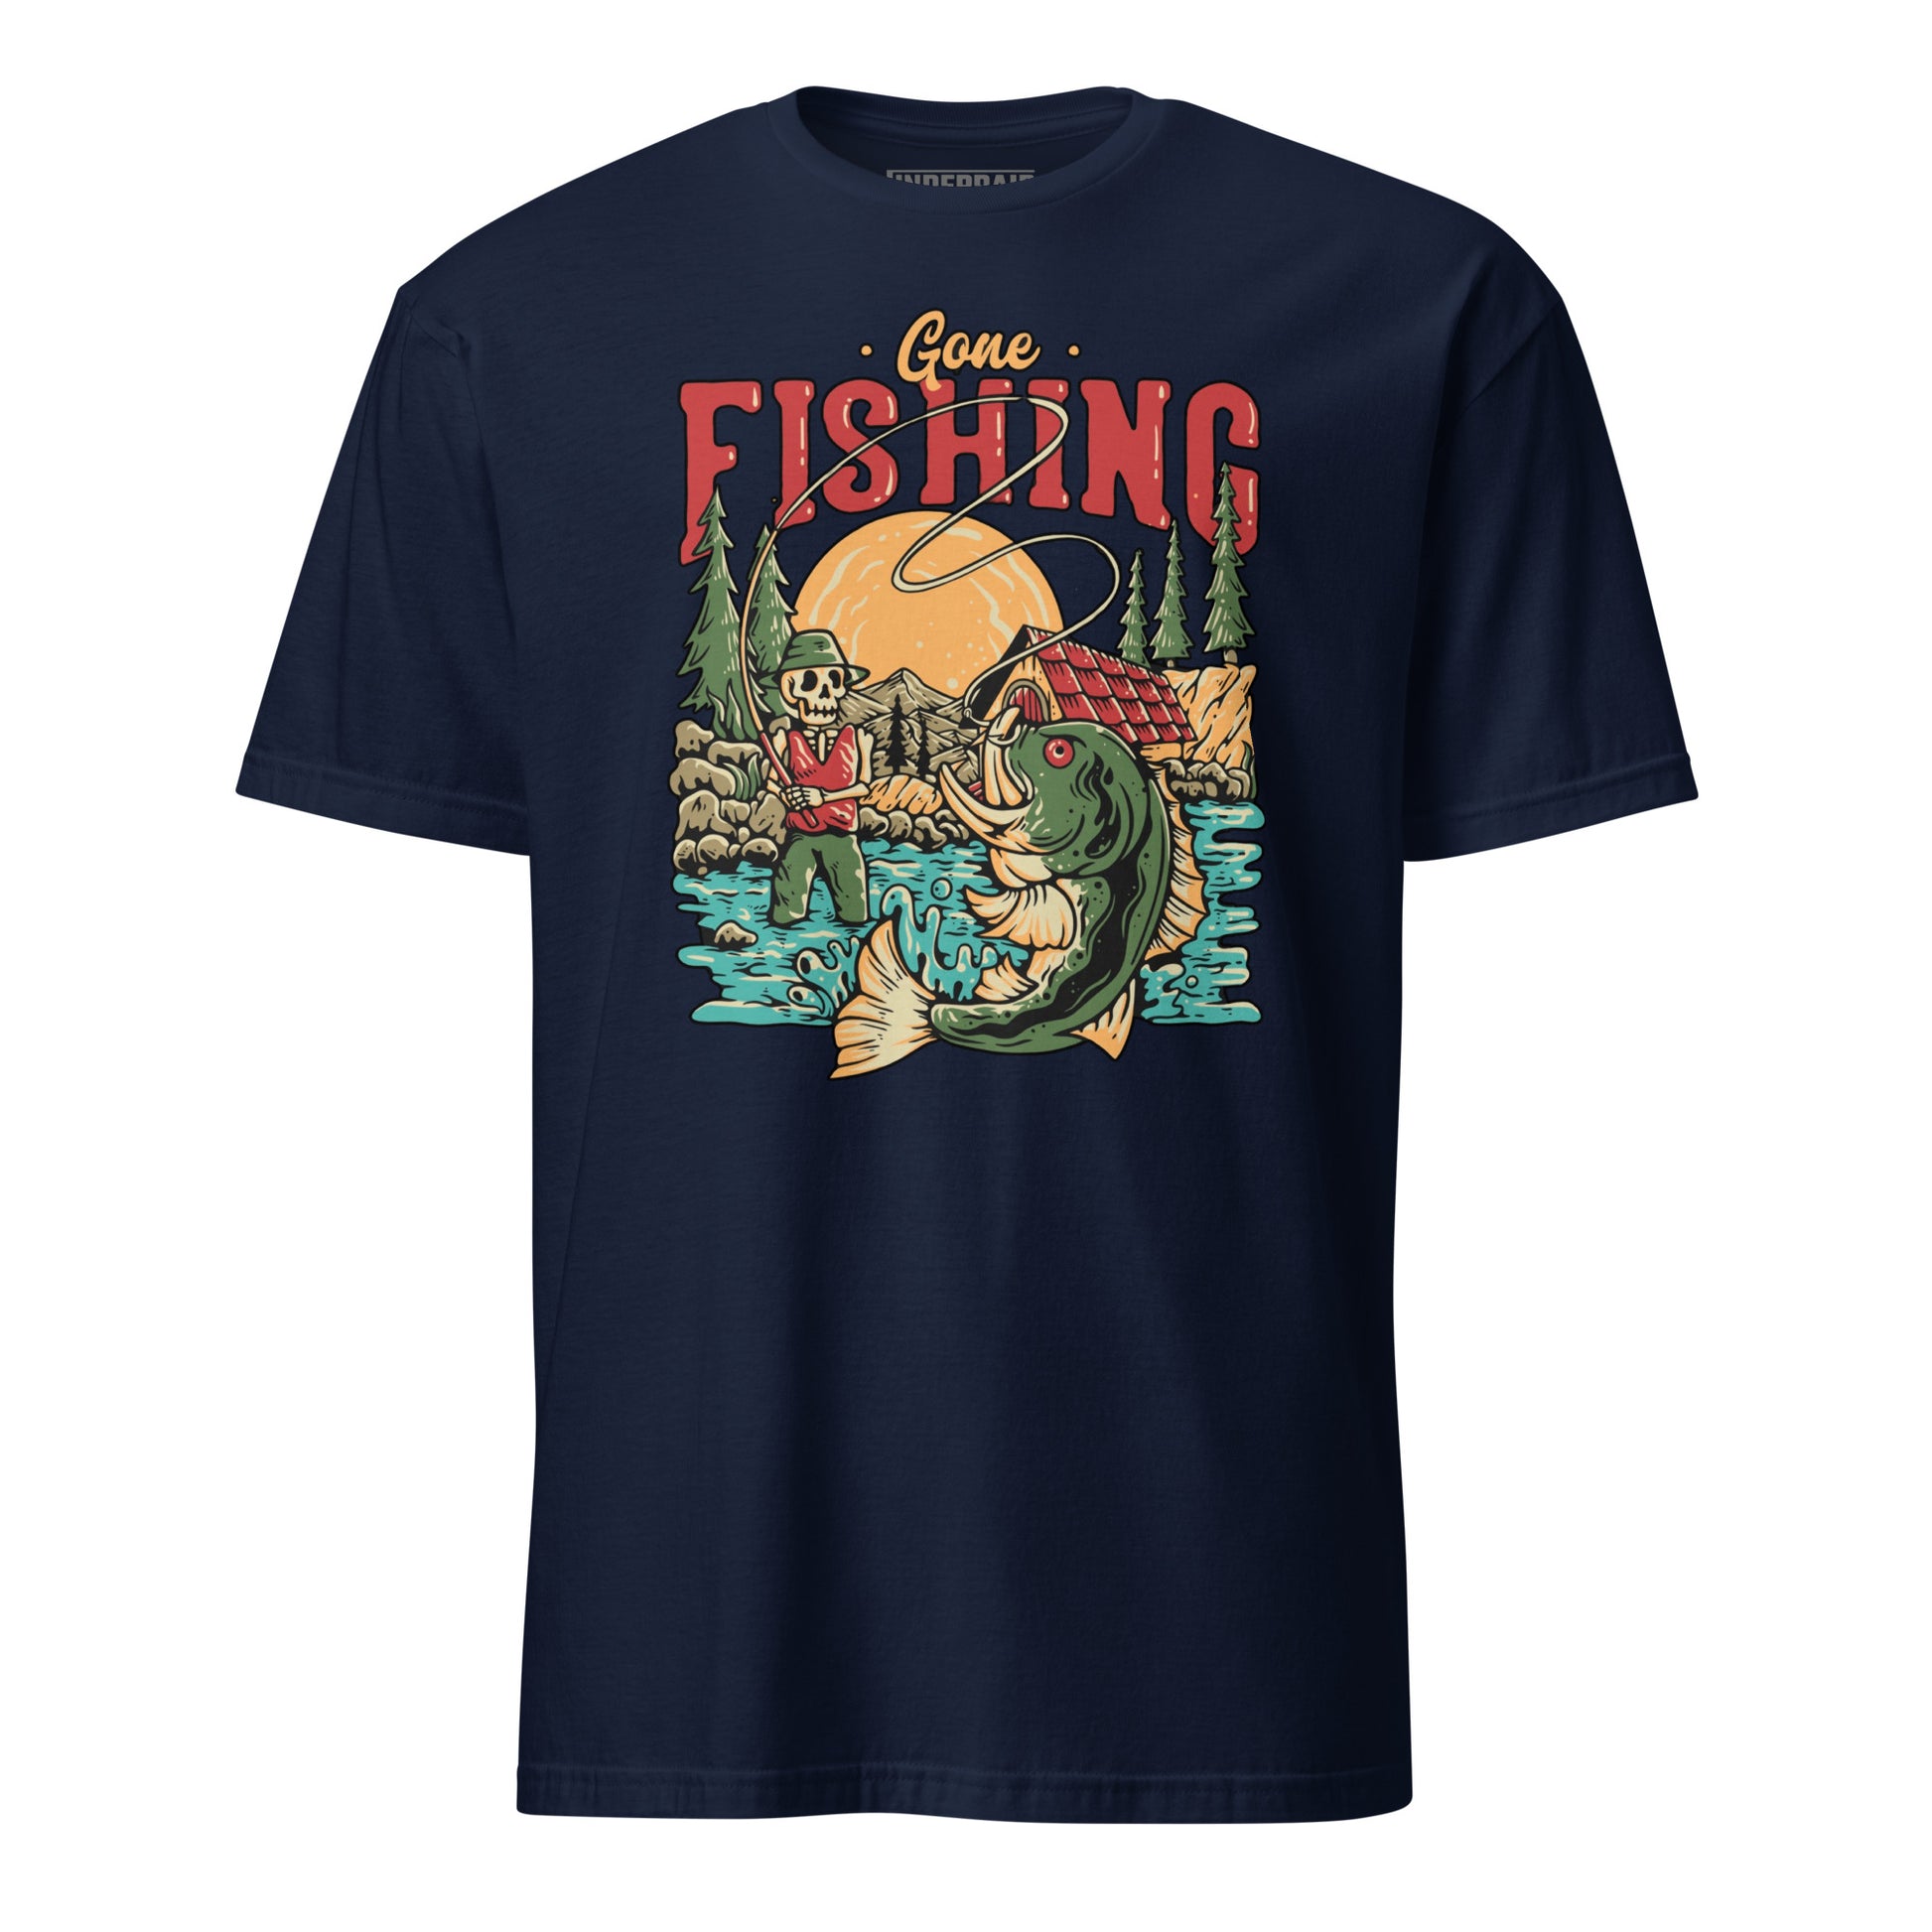 Gone Fishing graphic tee featuring design in full color